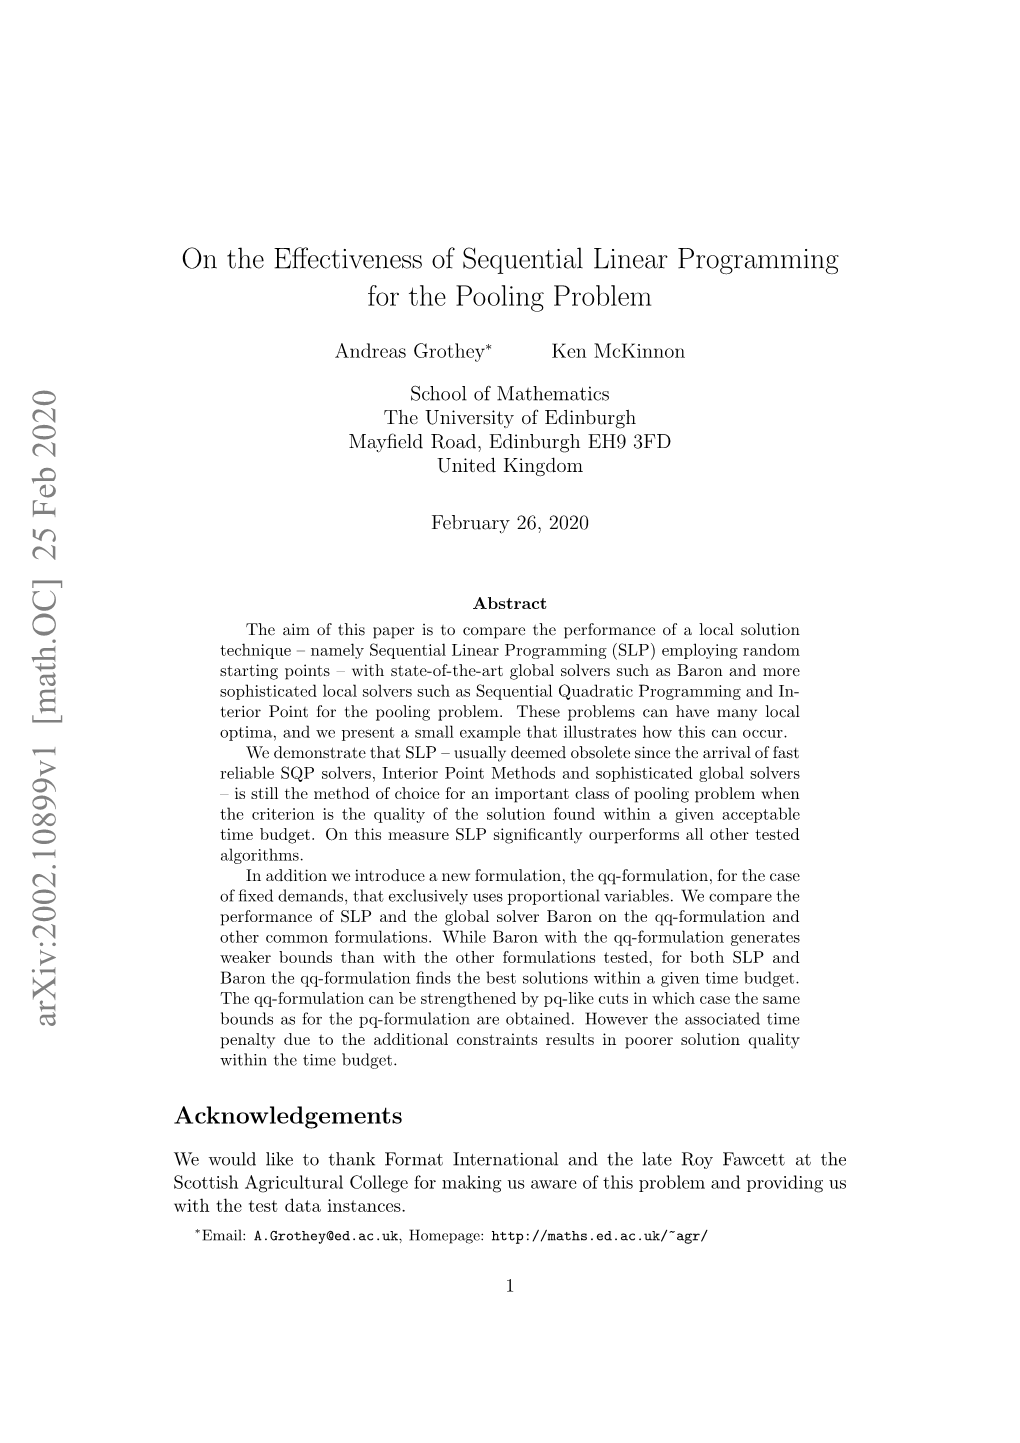 On the Effectiveness of Sequential Linear Programming for the Pooling